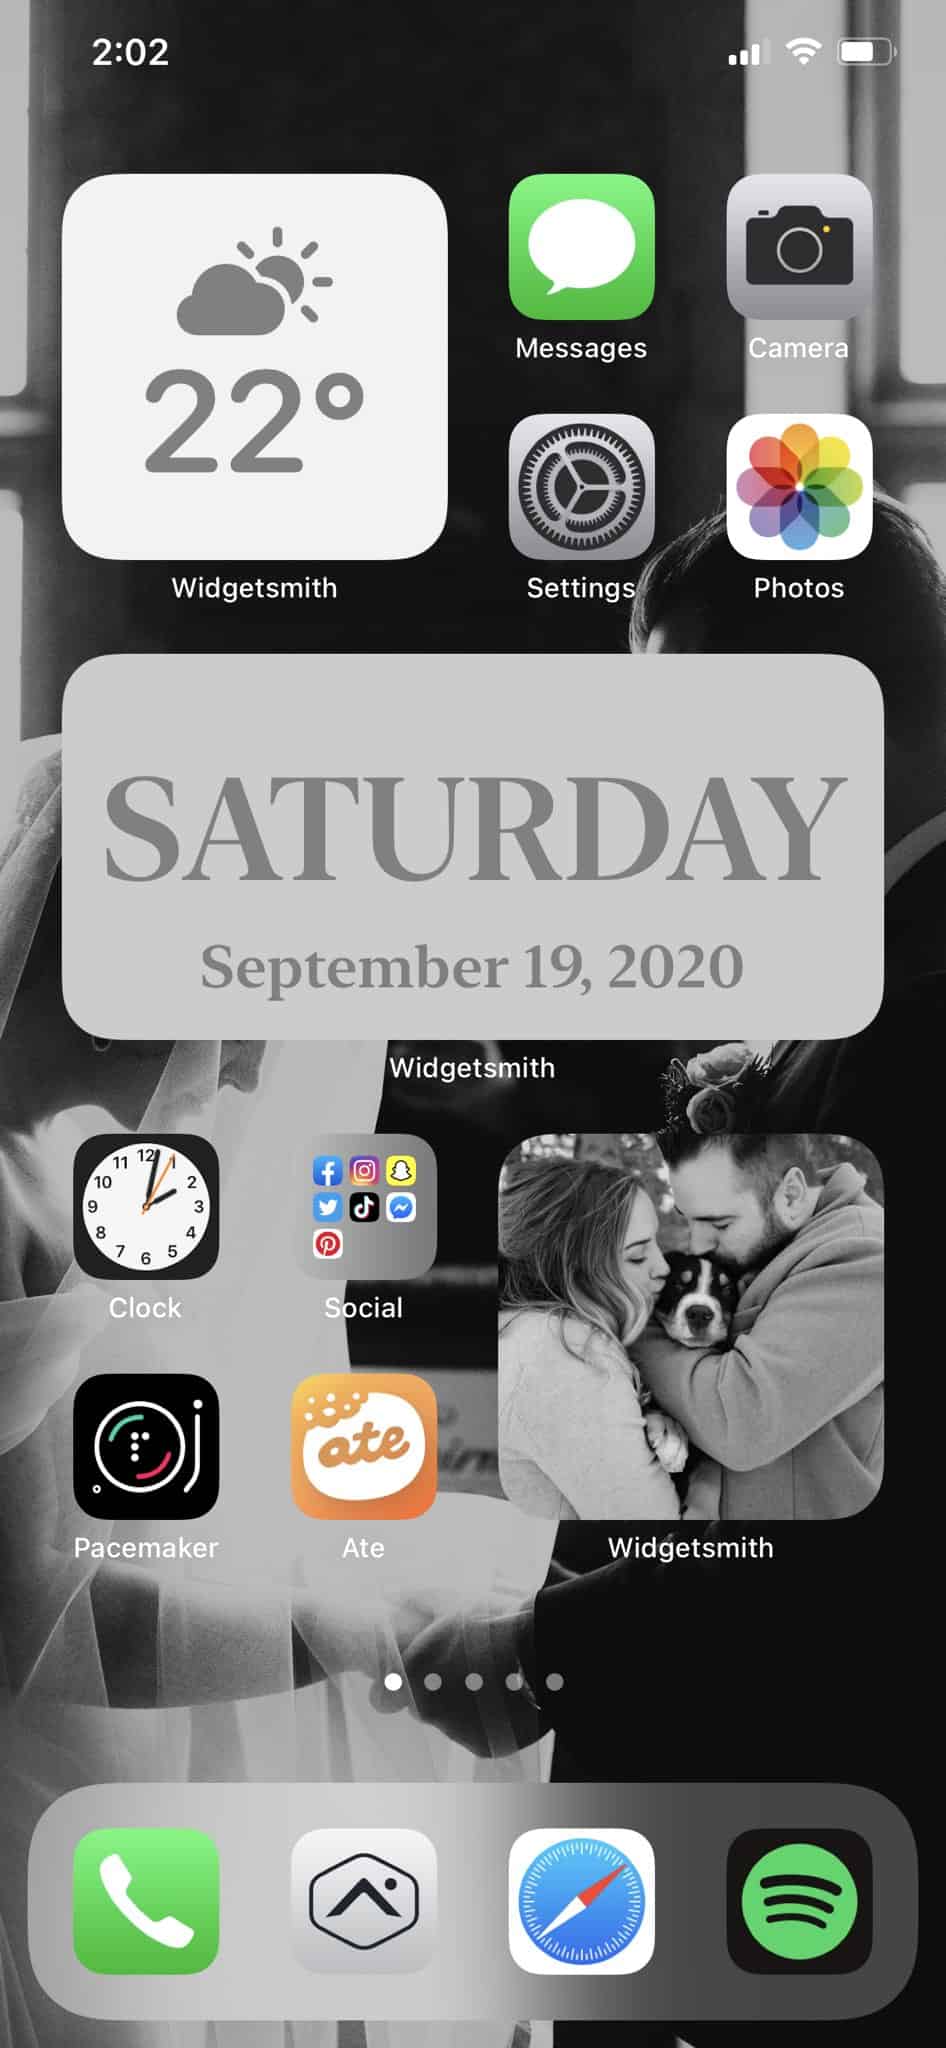 aesthetic ios iphone ipad homescreen icons chyenne layout allthings